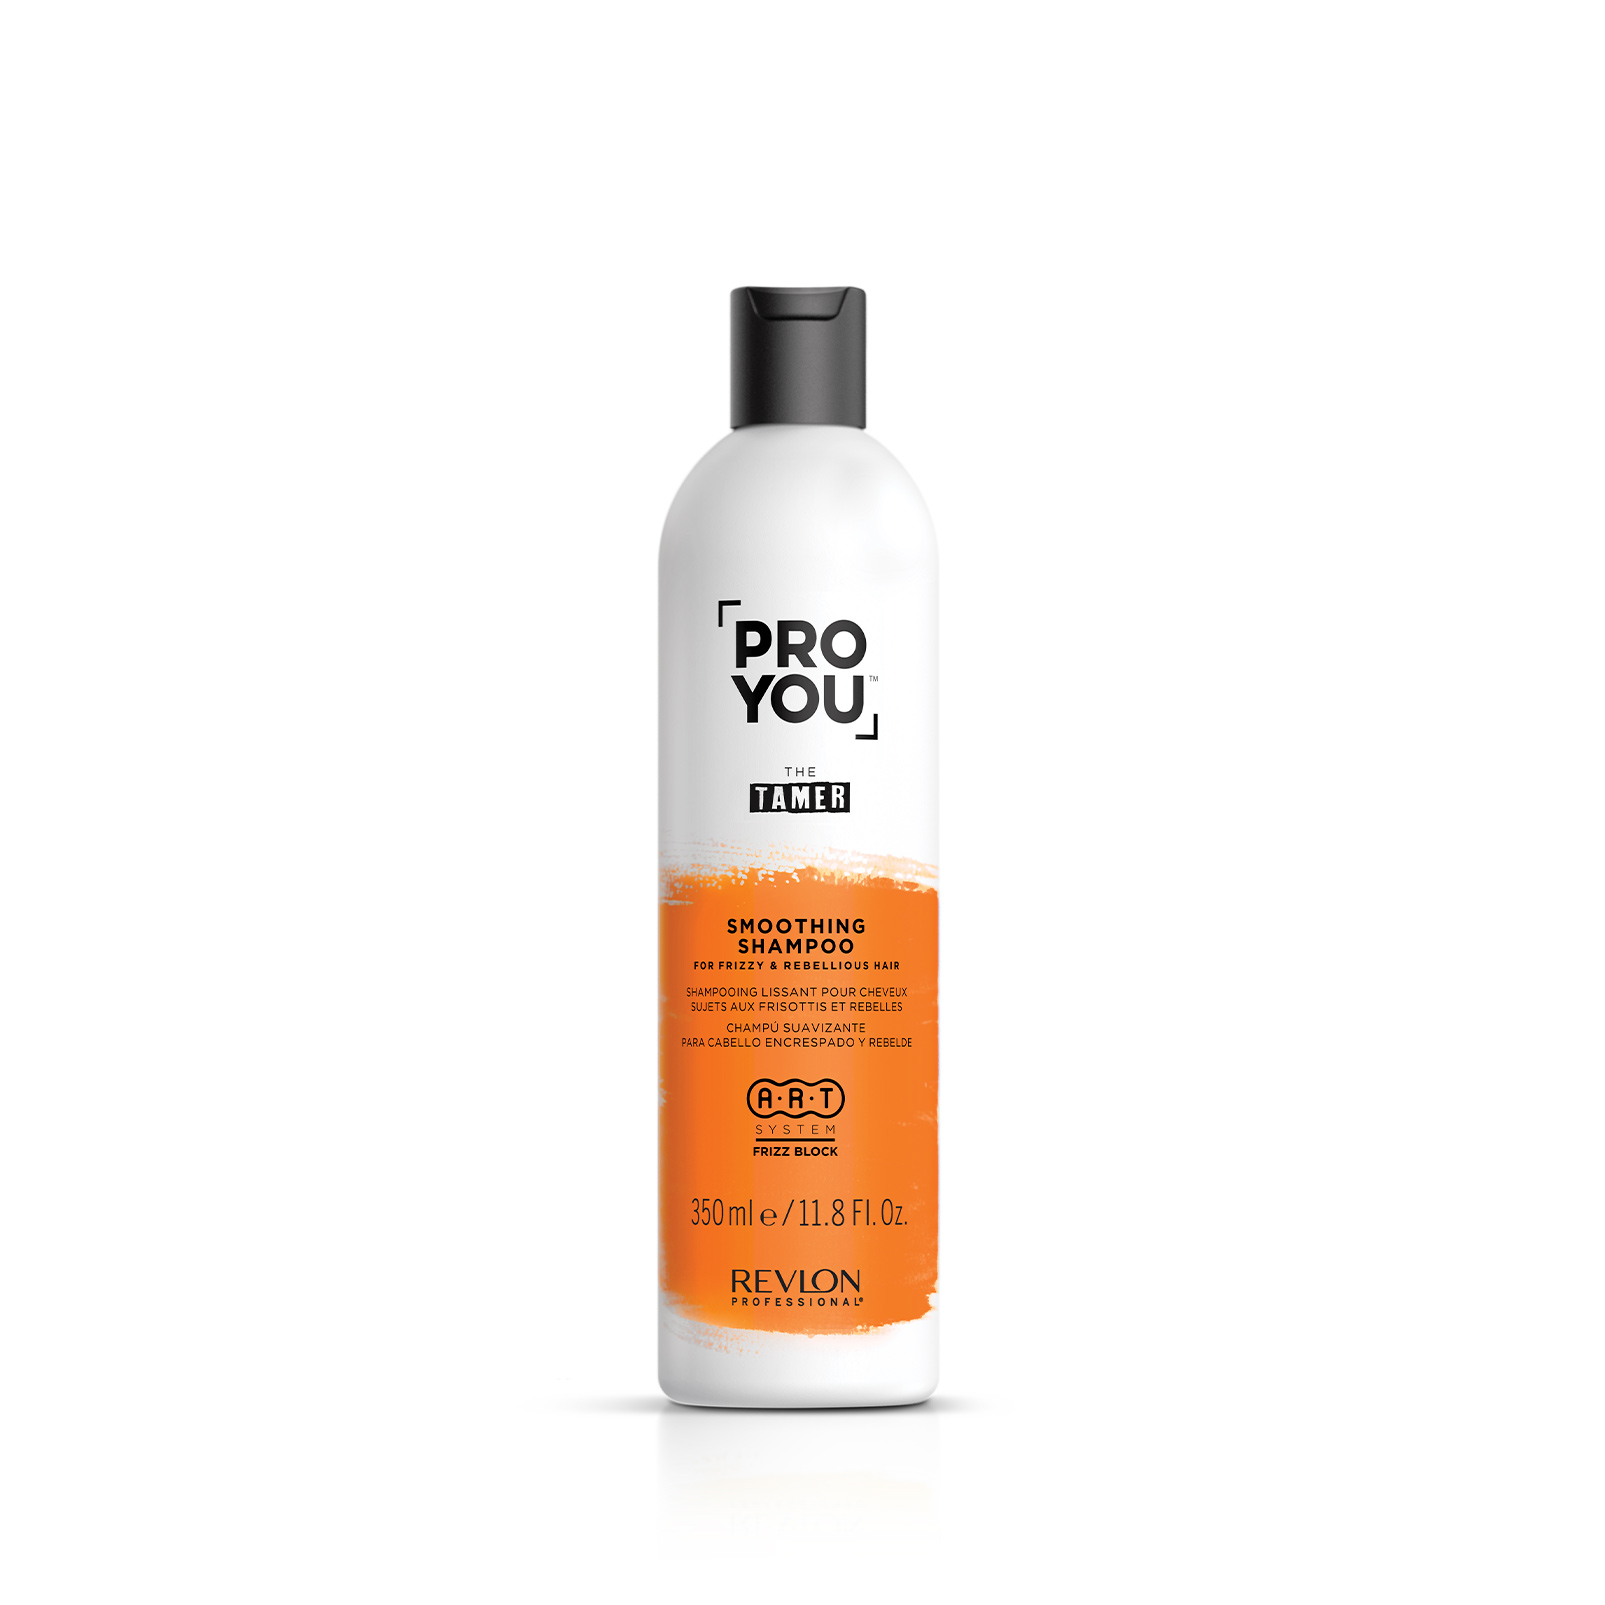 You™ The Tamer Smoothing Shampoo - Professional